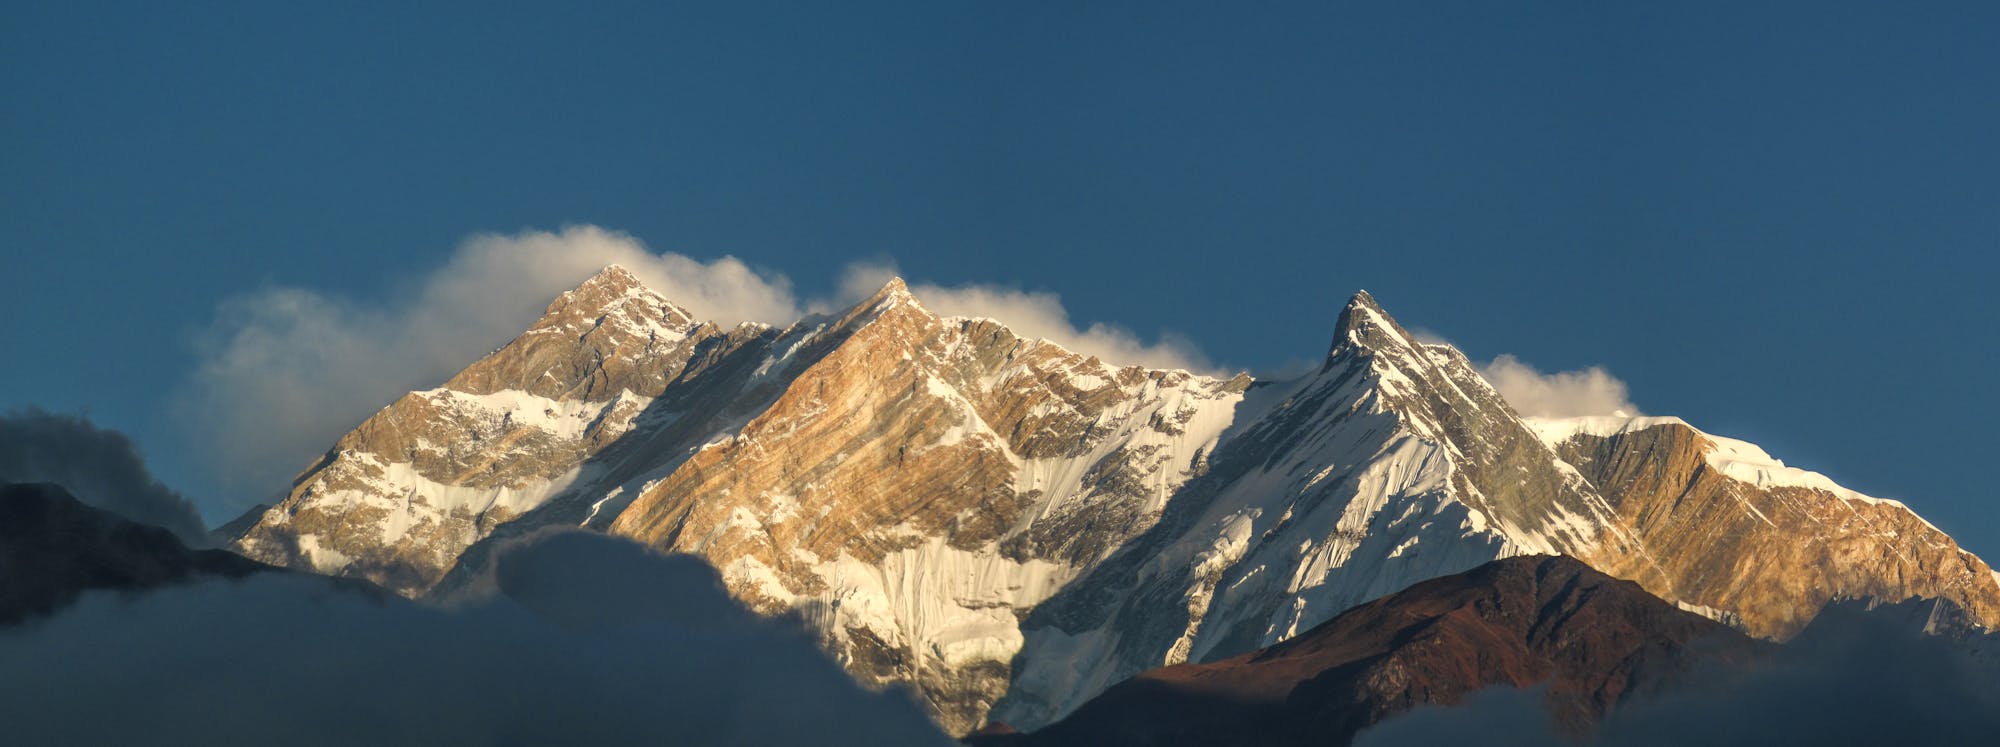 Three peaks bathed in the afternoon sun on the back half of the Annapurna Circuit.